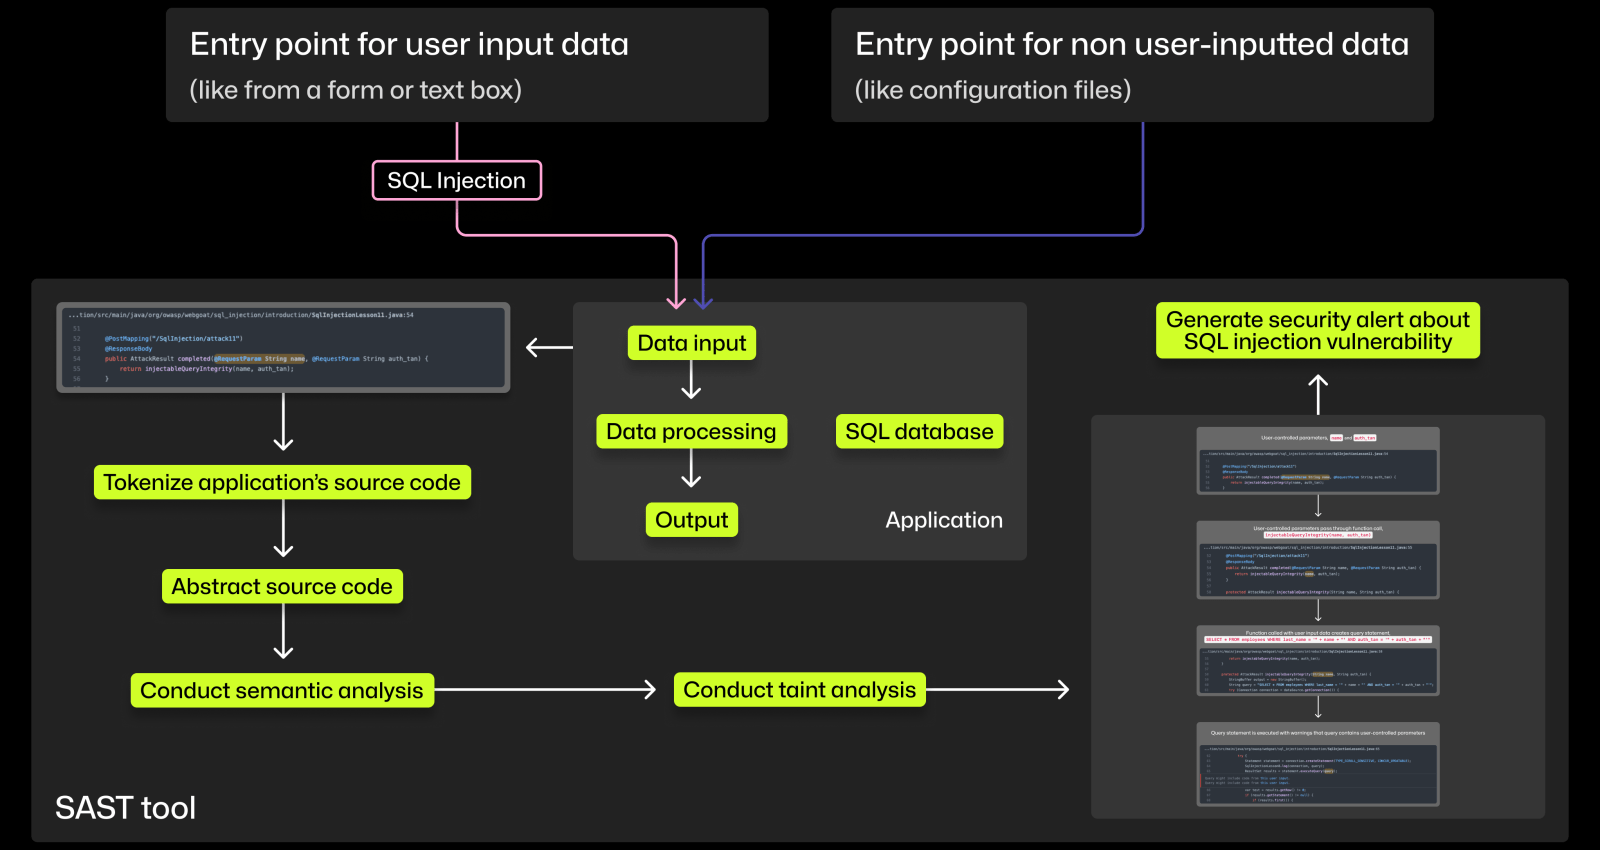 A schematic diagram depicting the steps an SAST tool takes to scan the source code of an SQL application under an SQL injection attack. The first step is tokenizing the source code, the second is abstracting the source code, the third conducting semantic analysis, the fourth conducting taint analysis, and the last generating a security alert about the SQL injection vulnerability.